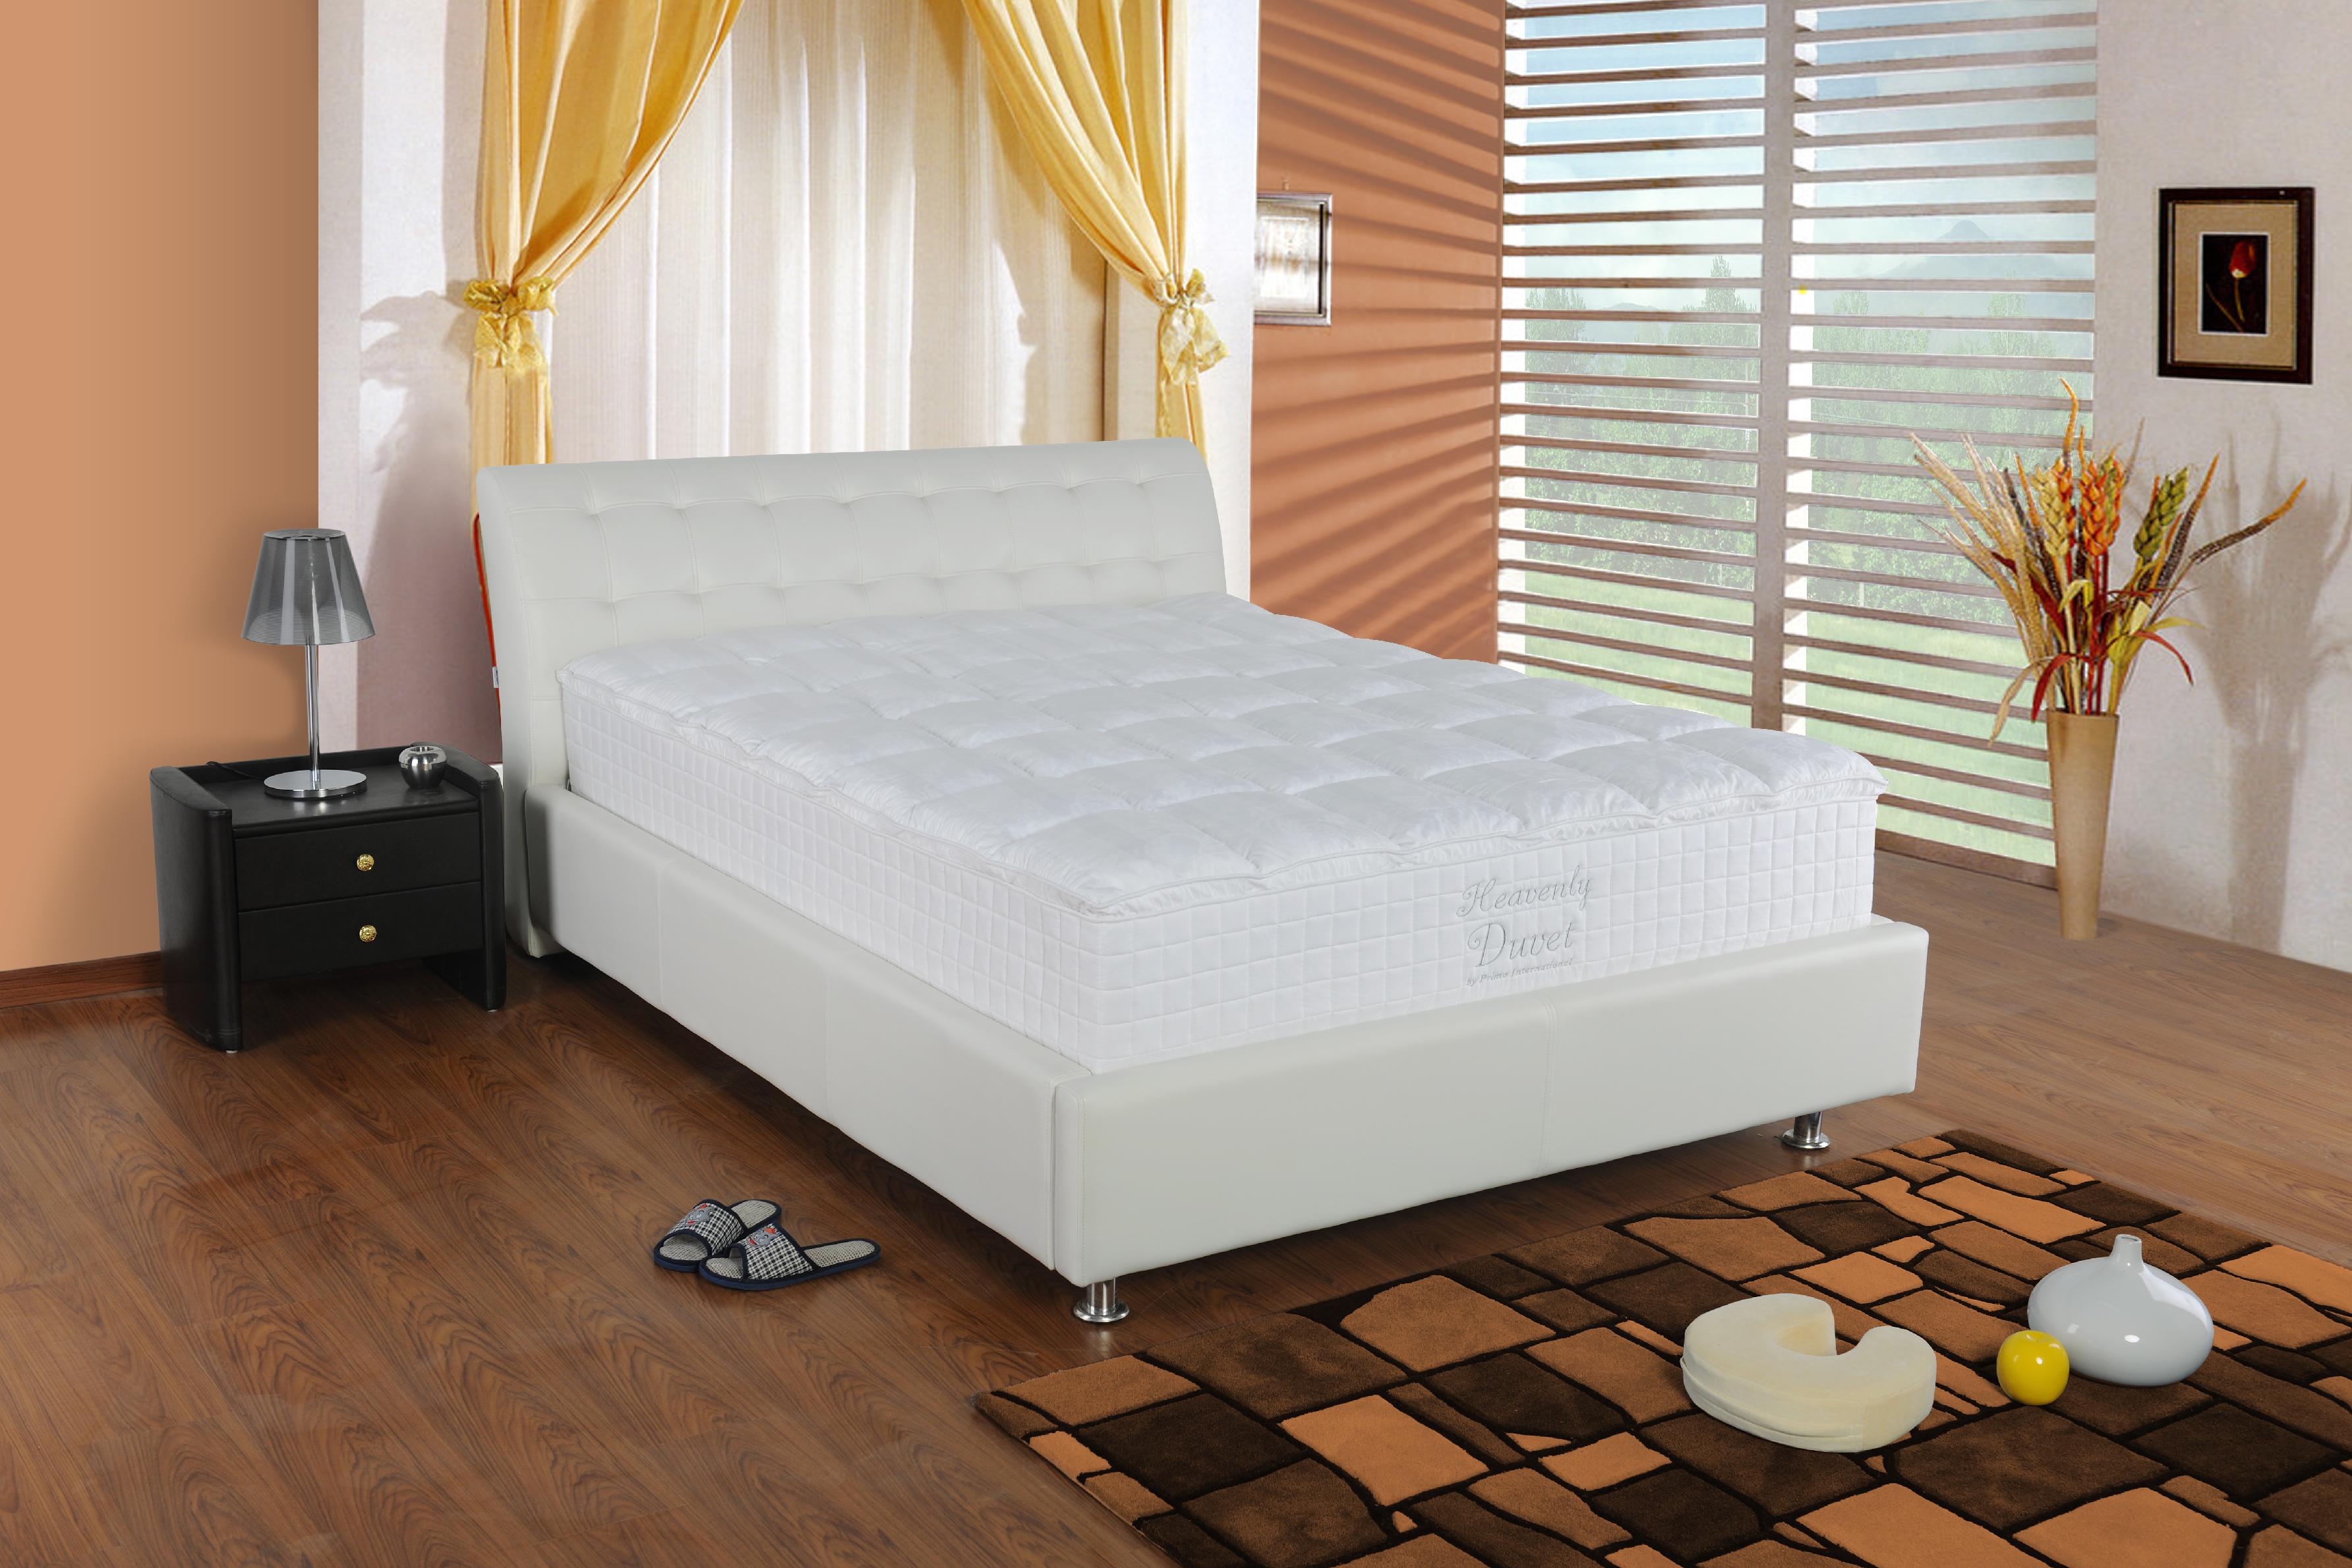 heavenly nights mattress review